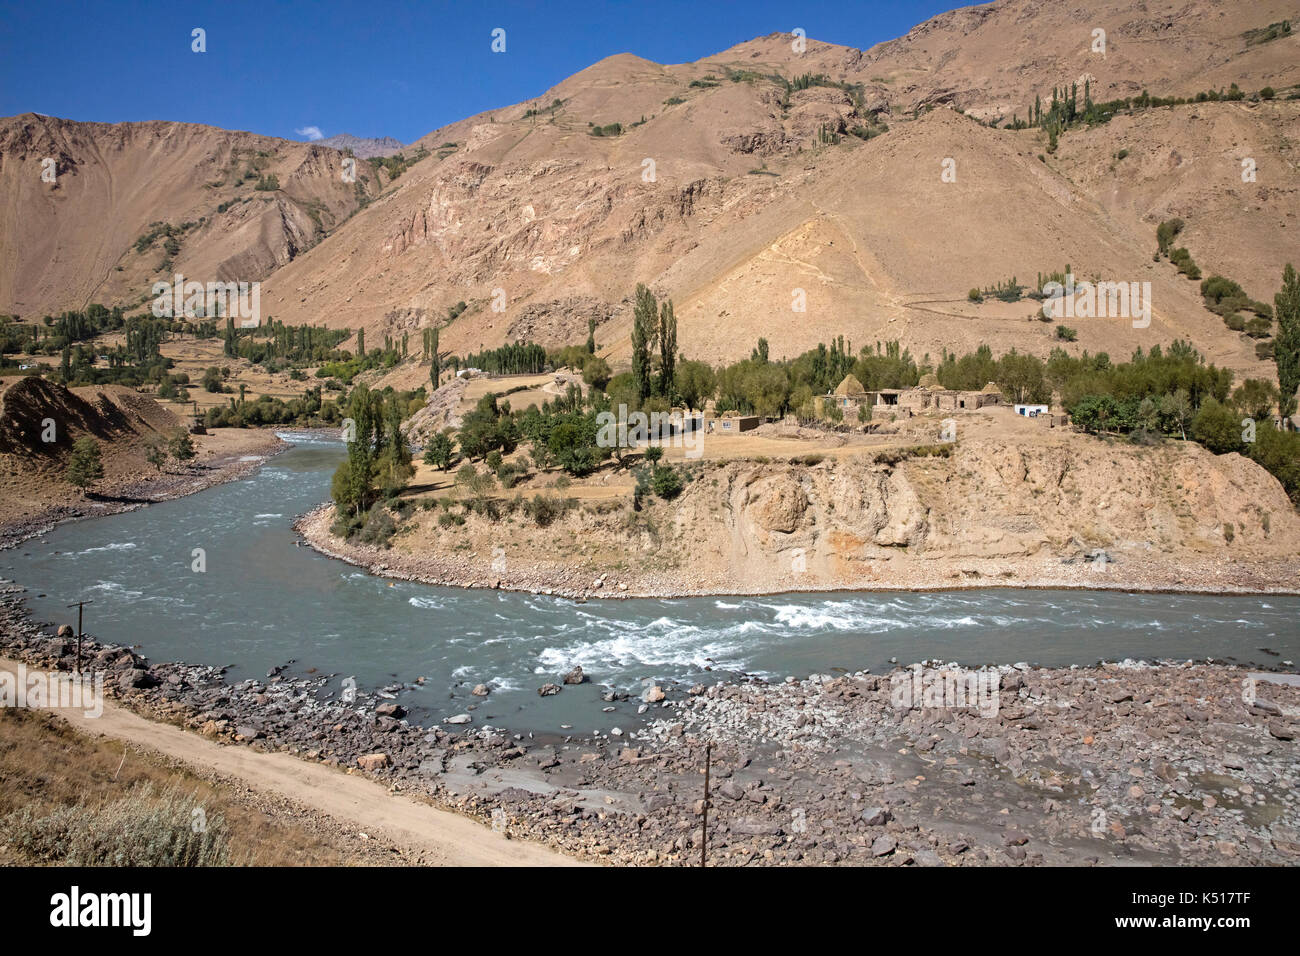 Little Afghan village and the Pamir Highway / M41 along the Pamir River, forms the boundary between Tajikistan and Afghanistan Stock Photo